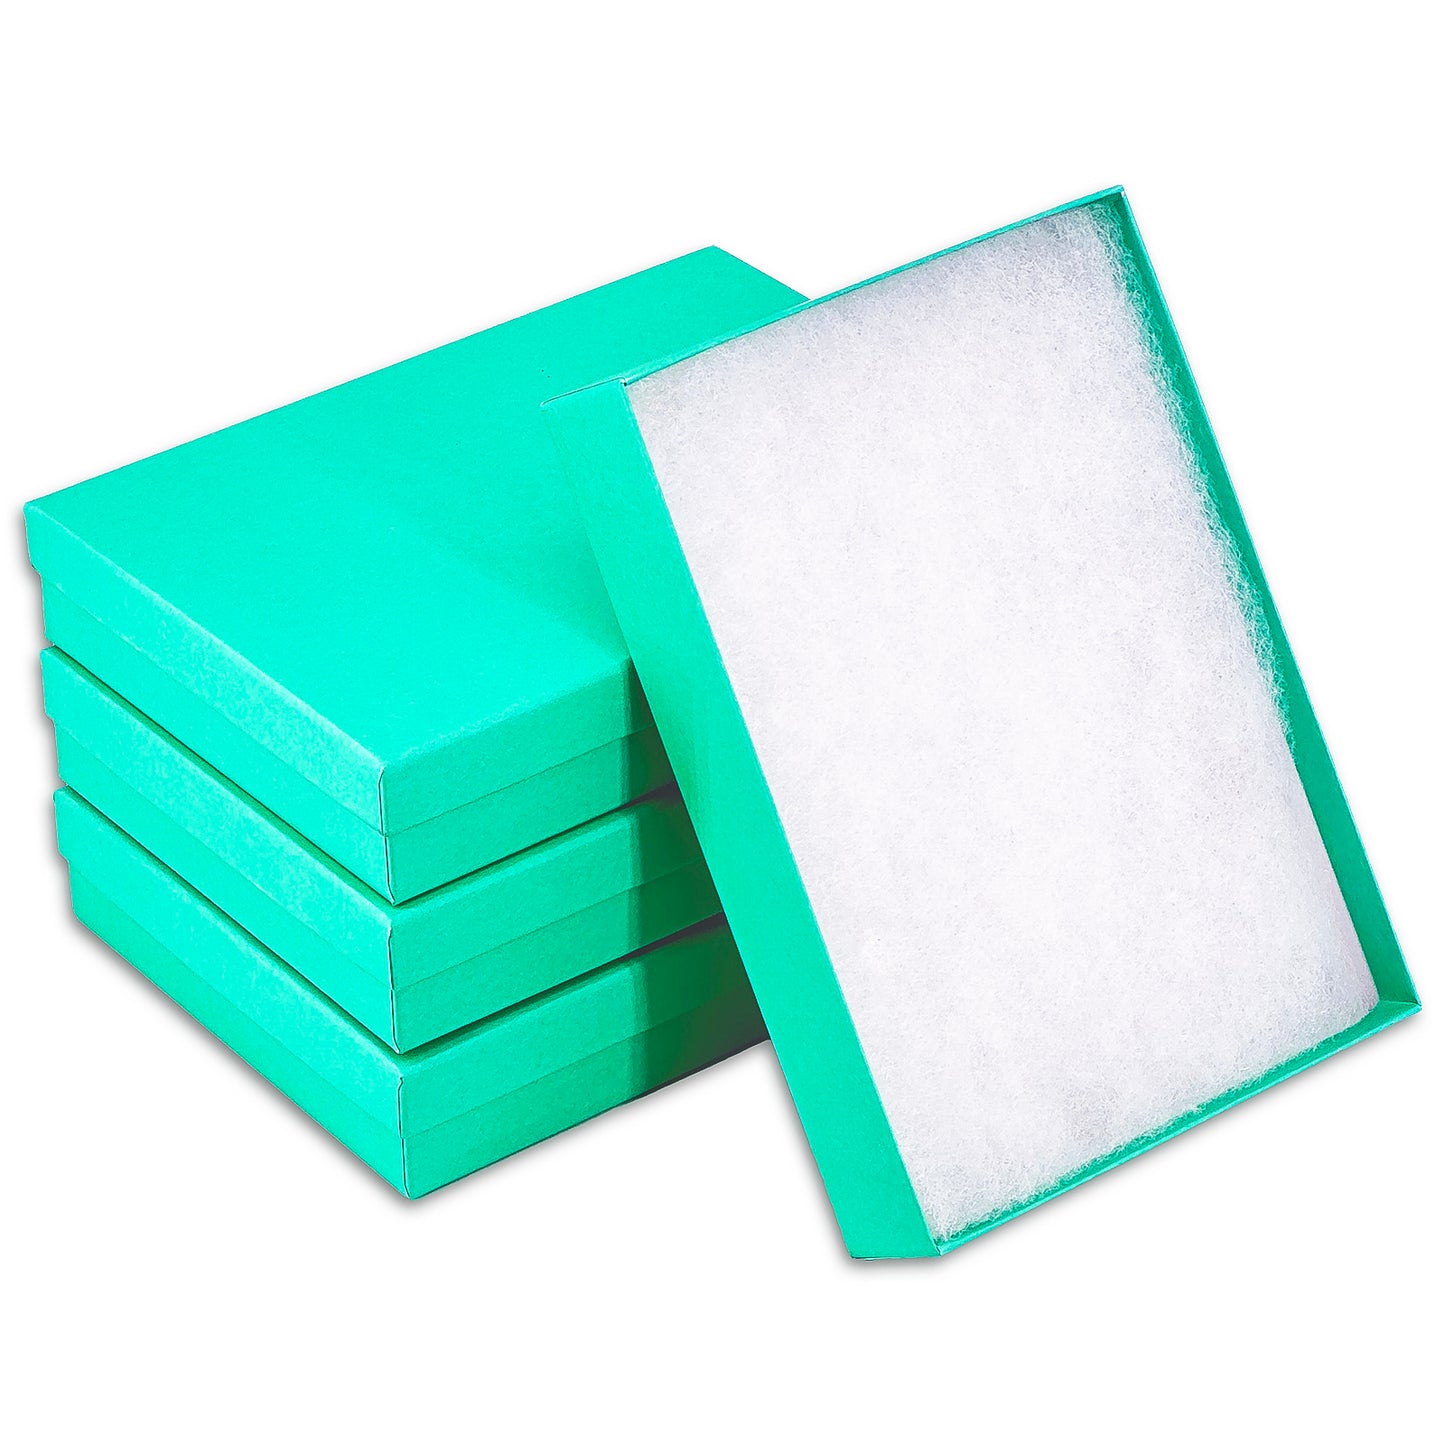 8 x 5 x 1 1/4" Teal Cotton Filled Paper Box